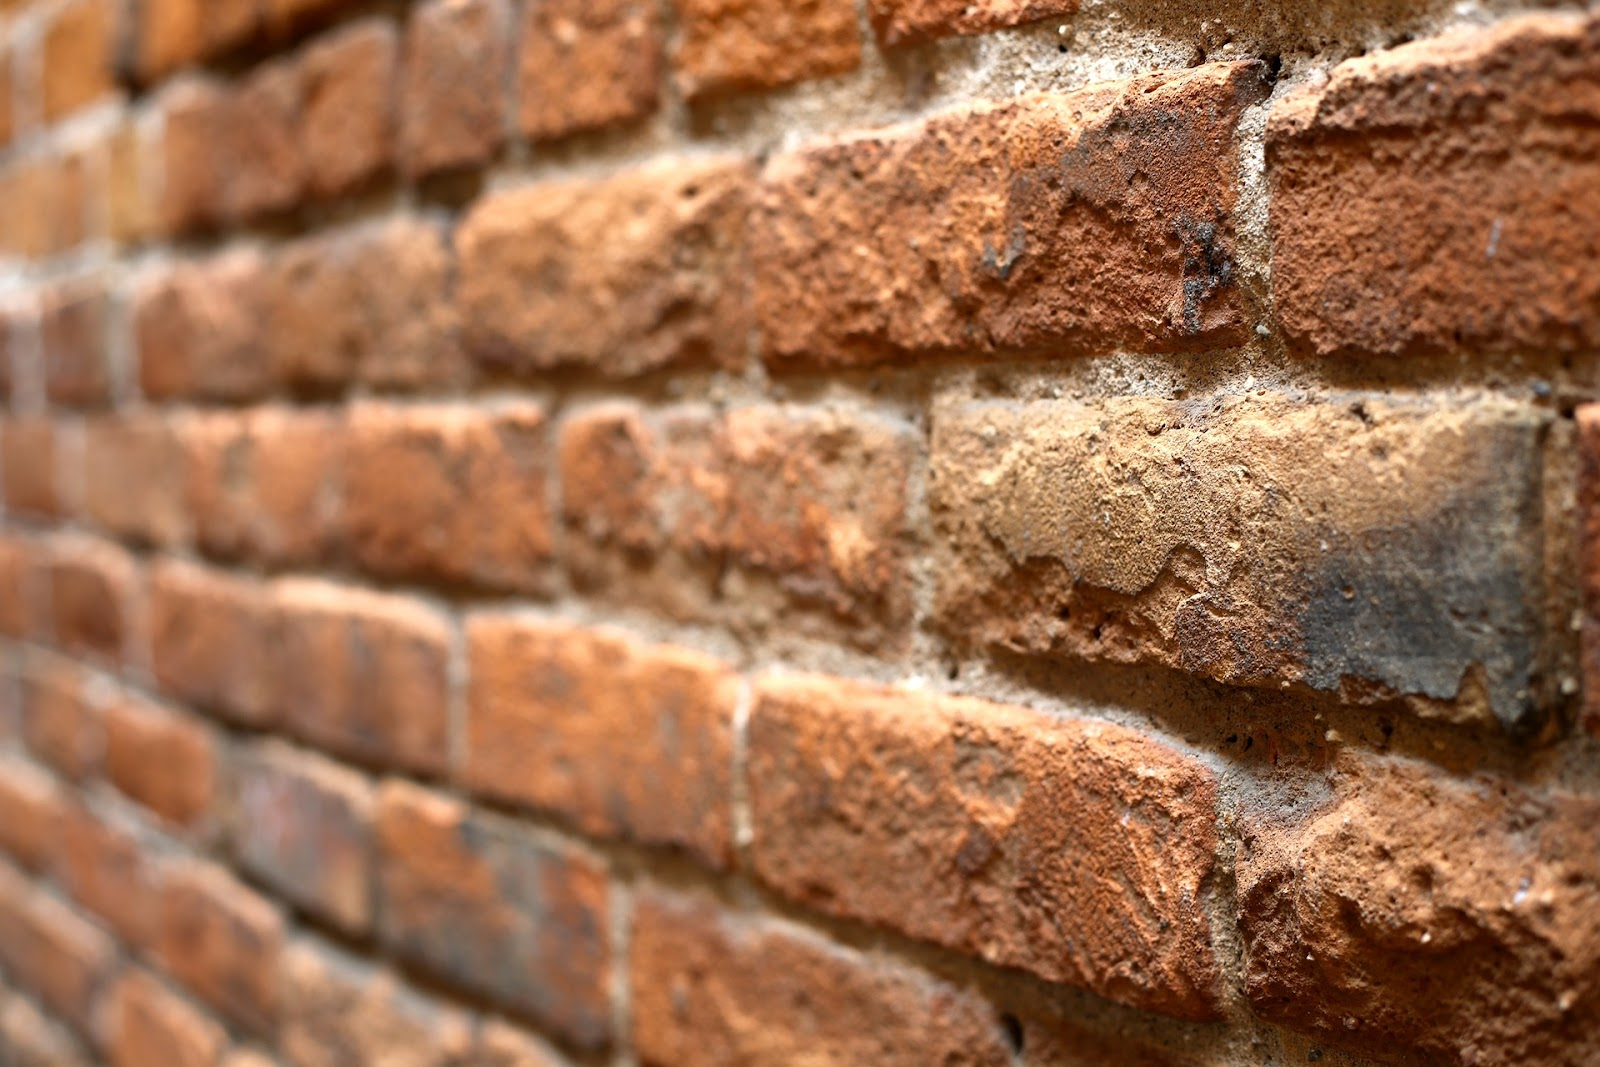 A close-up photograph of a brick wall with varying shades of reddish-brown bricks stacked neatly together. The rough texture of the bricks is visible